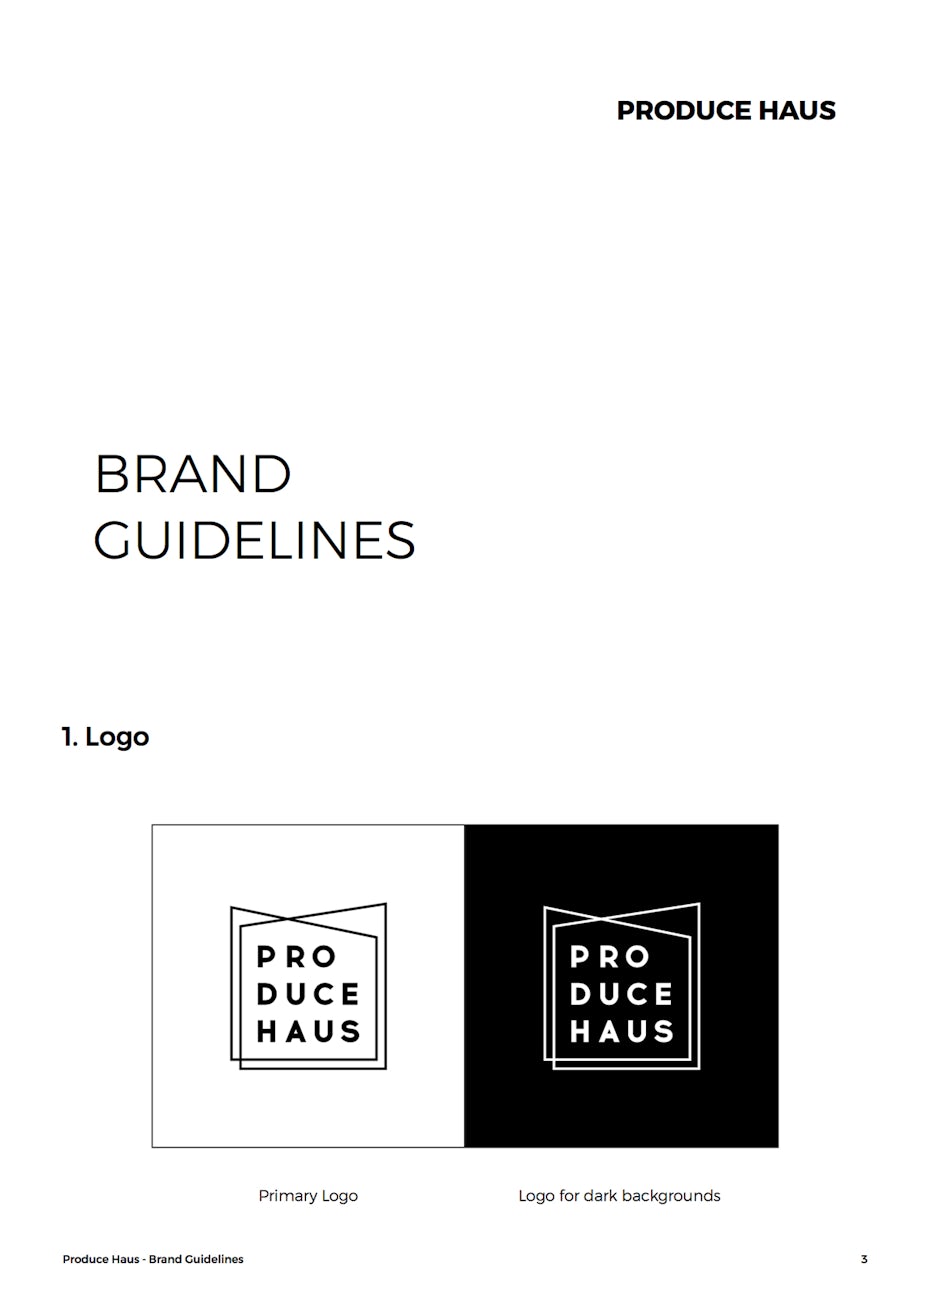 PRODUCE HAUS brand style guide